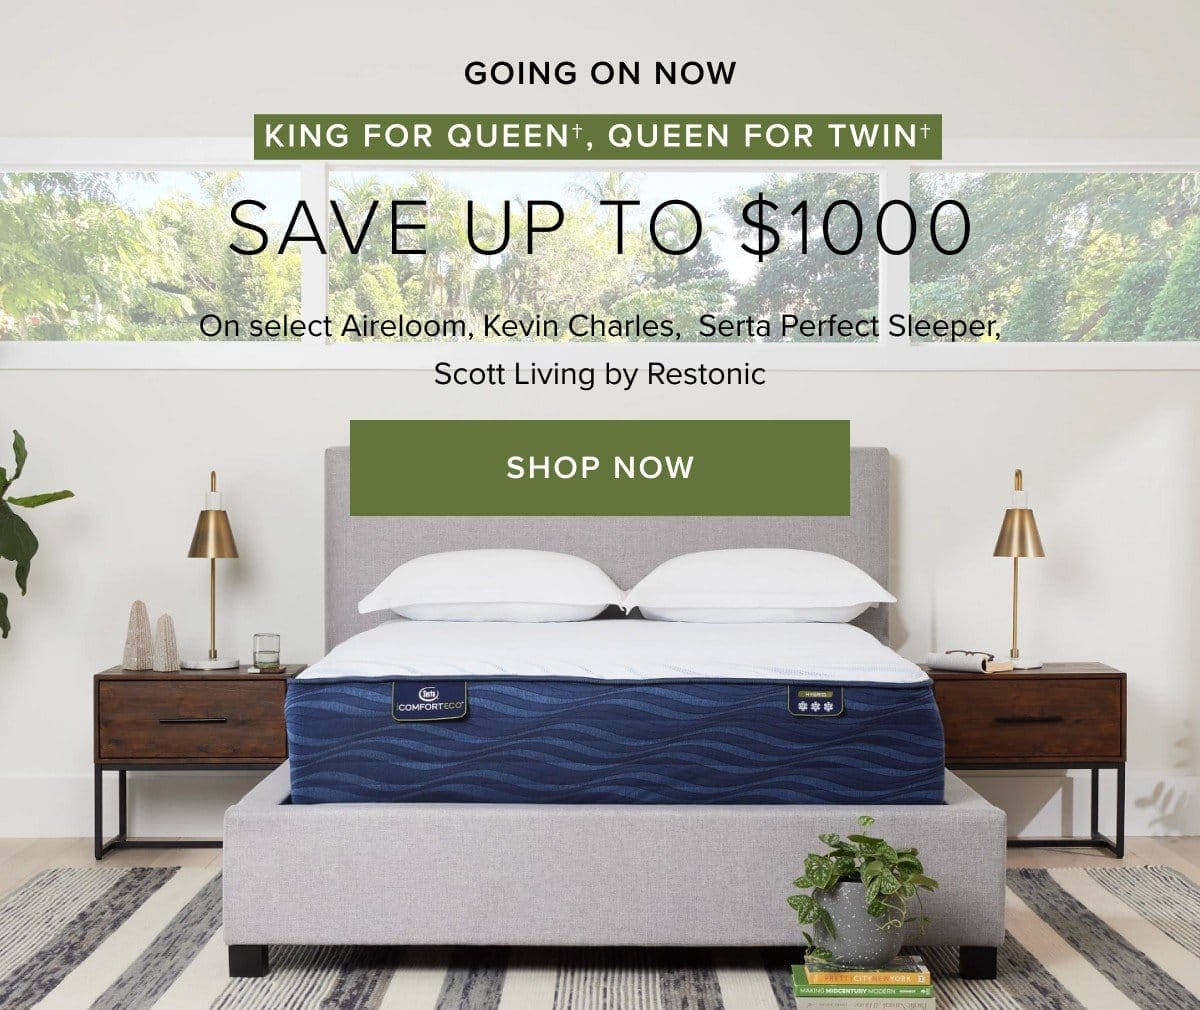 going on now. king for queen or queen for twin save up to \\$1000 on select mattresses. shop now